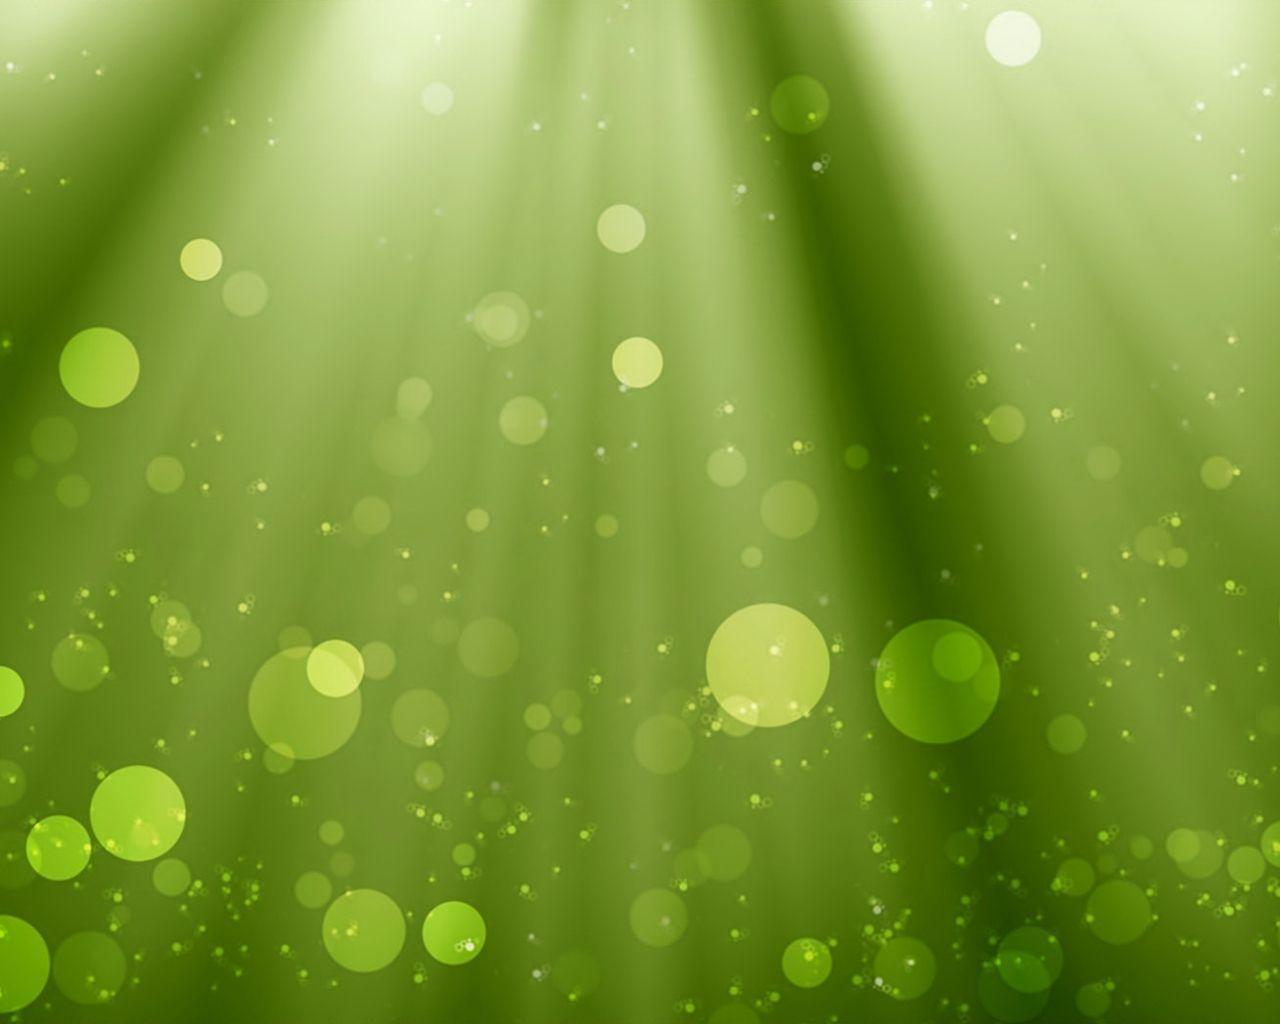 green apple wallpaper 6 - Image And Wallpaper free to